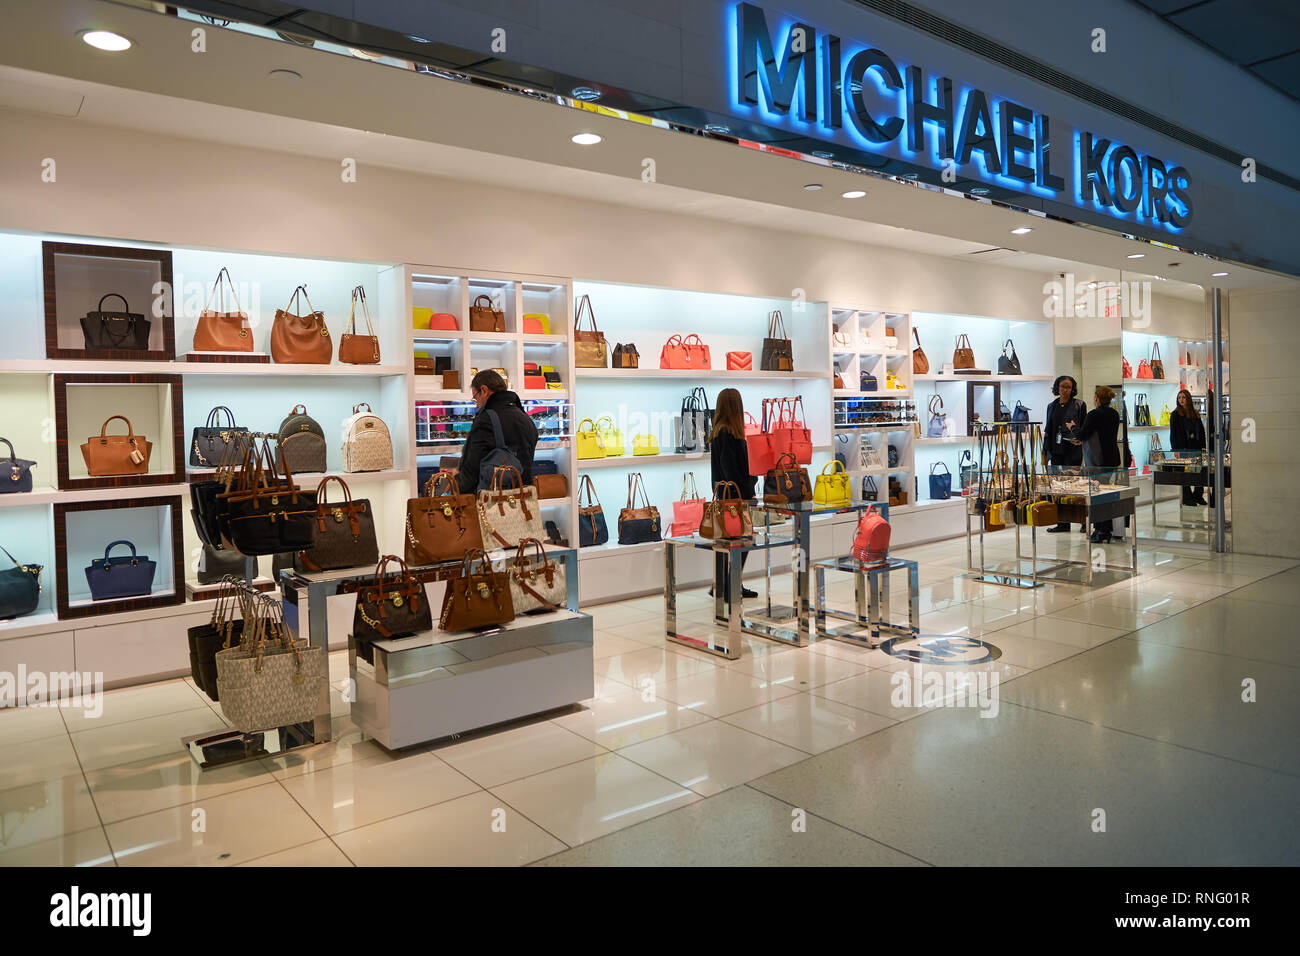 NEW YORK - APRIL 06, 2016: Michael Kors store in JFK Airport. Michael Kors  Holdings is an American luxury fashion company established in 1981 by desig  Stock Photo - Alamy